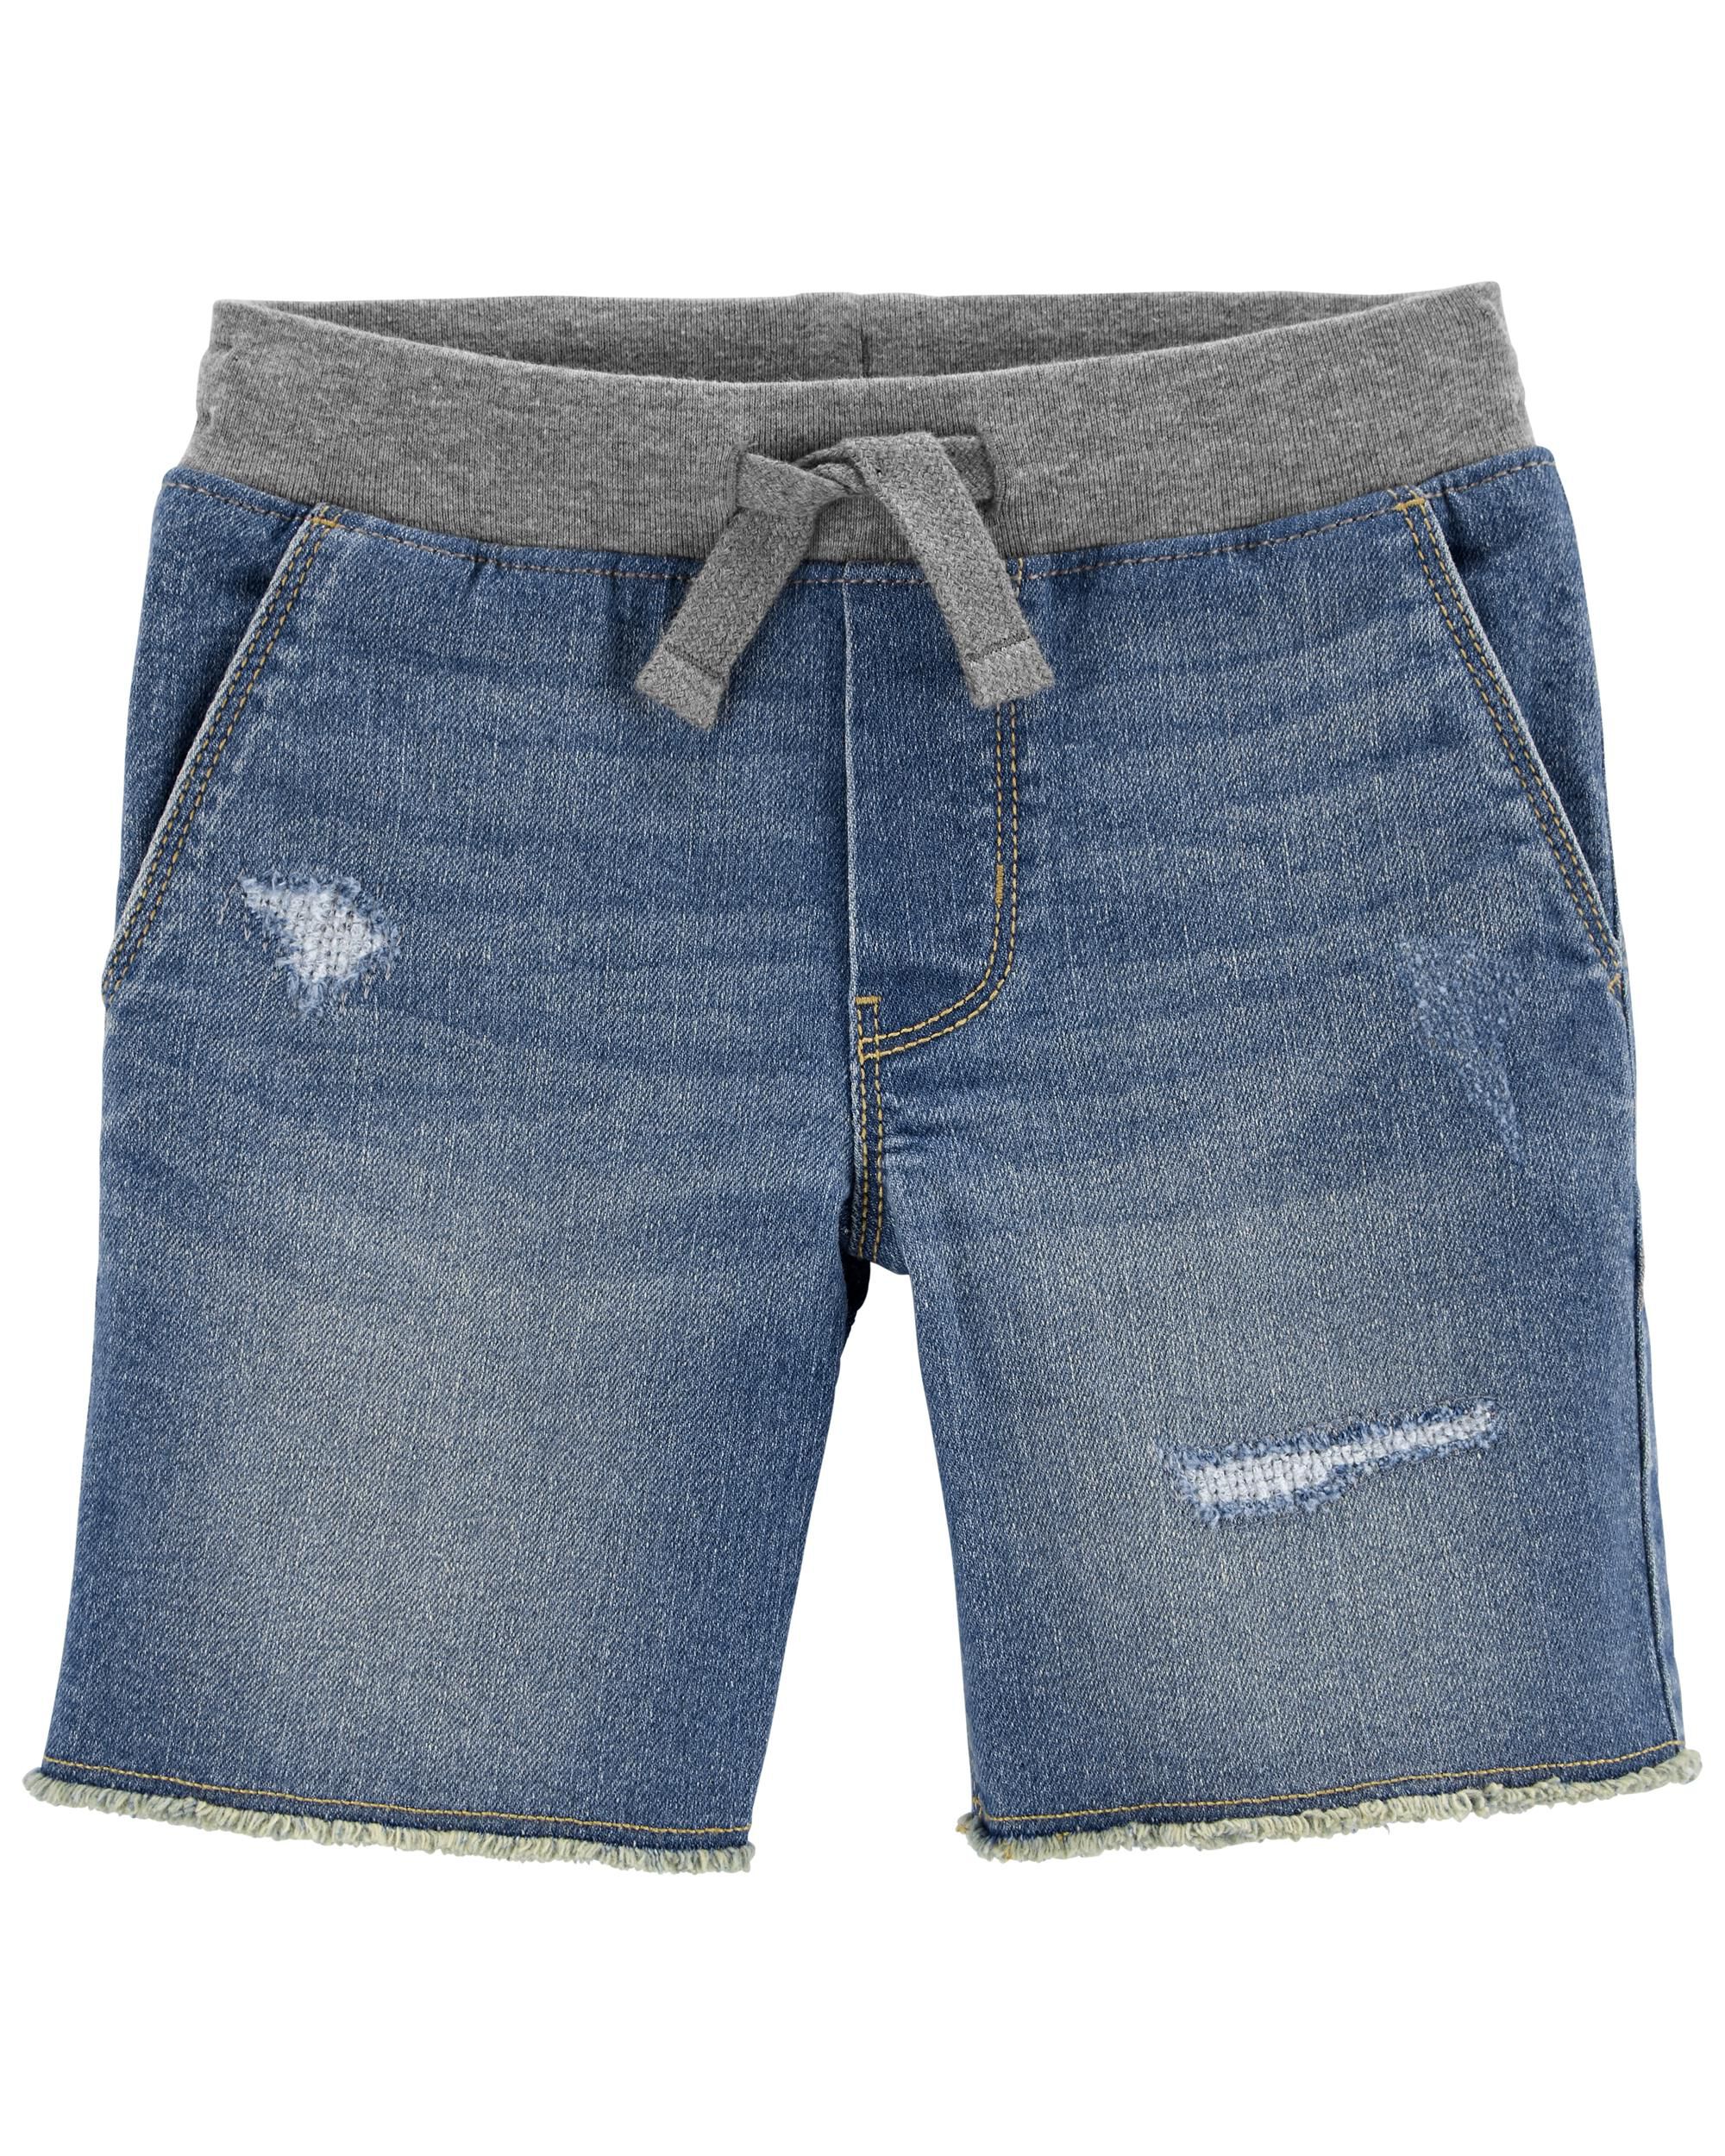 Details about   Carter's Boy Shorts 5T Functional Drawcord Denim New 